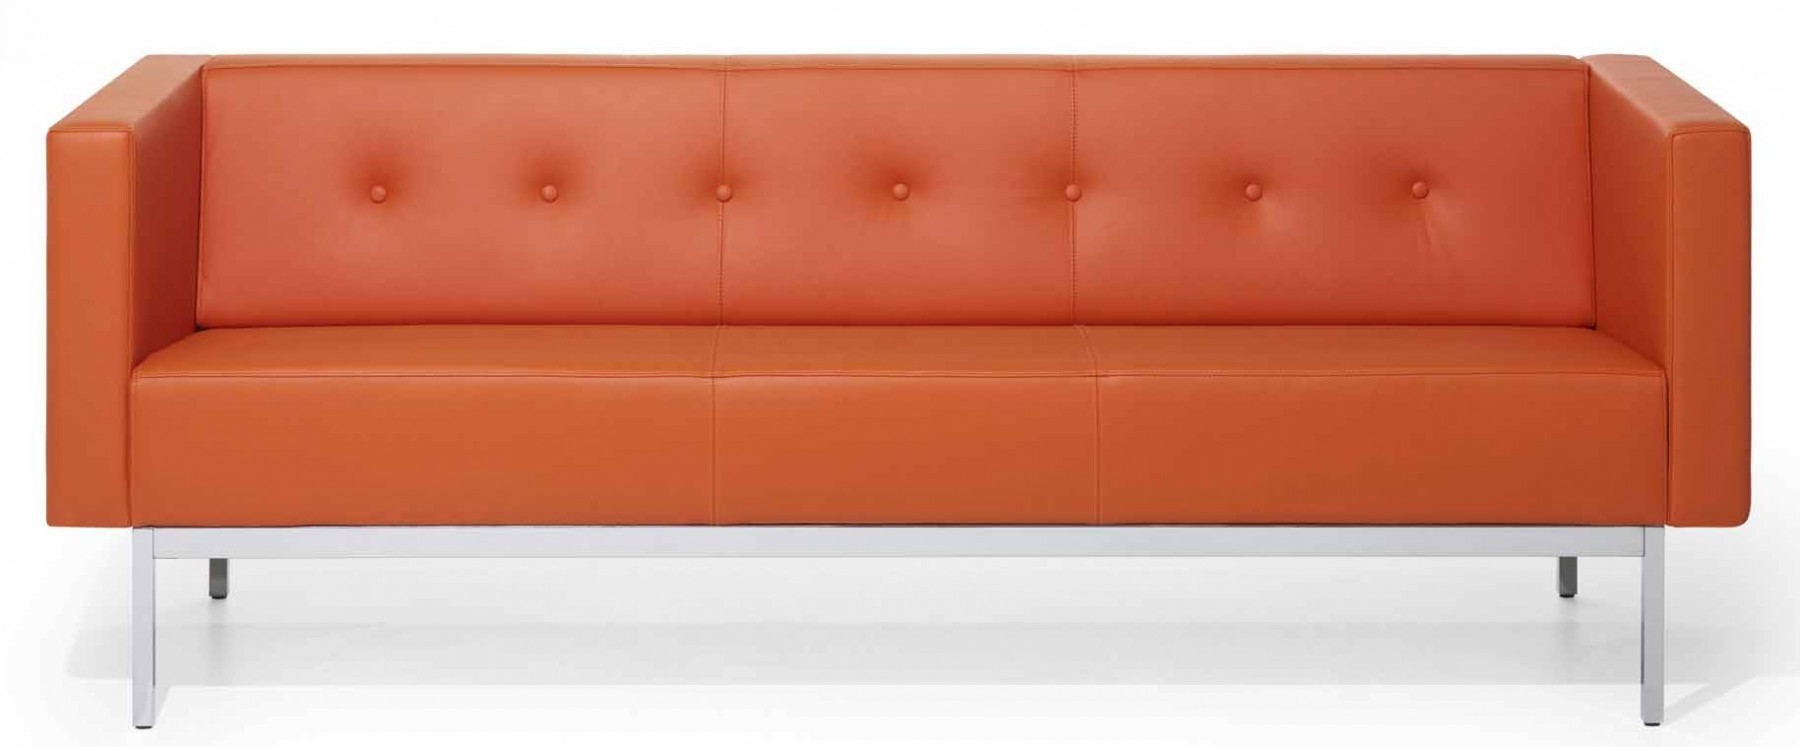 Artifort 070 sofa without arms gr shop canada 1